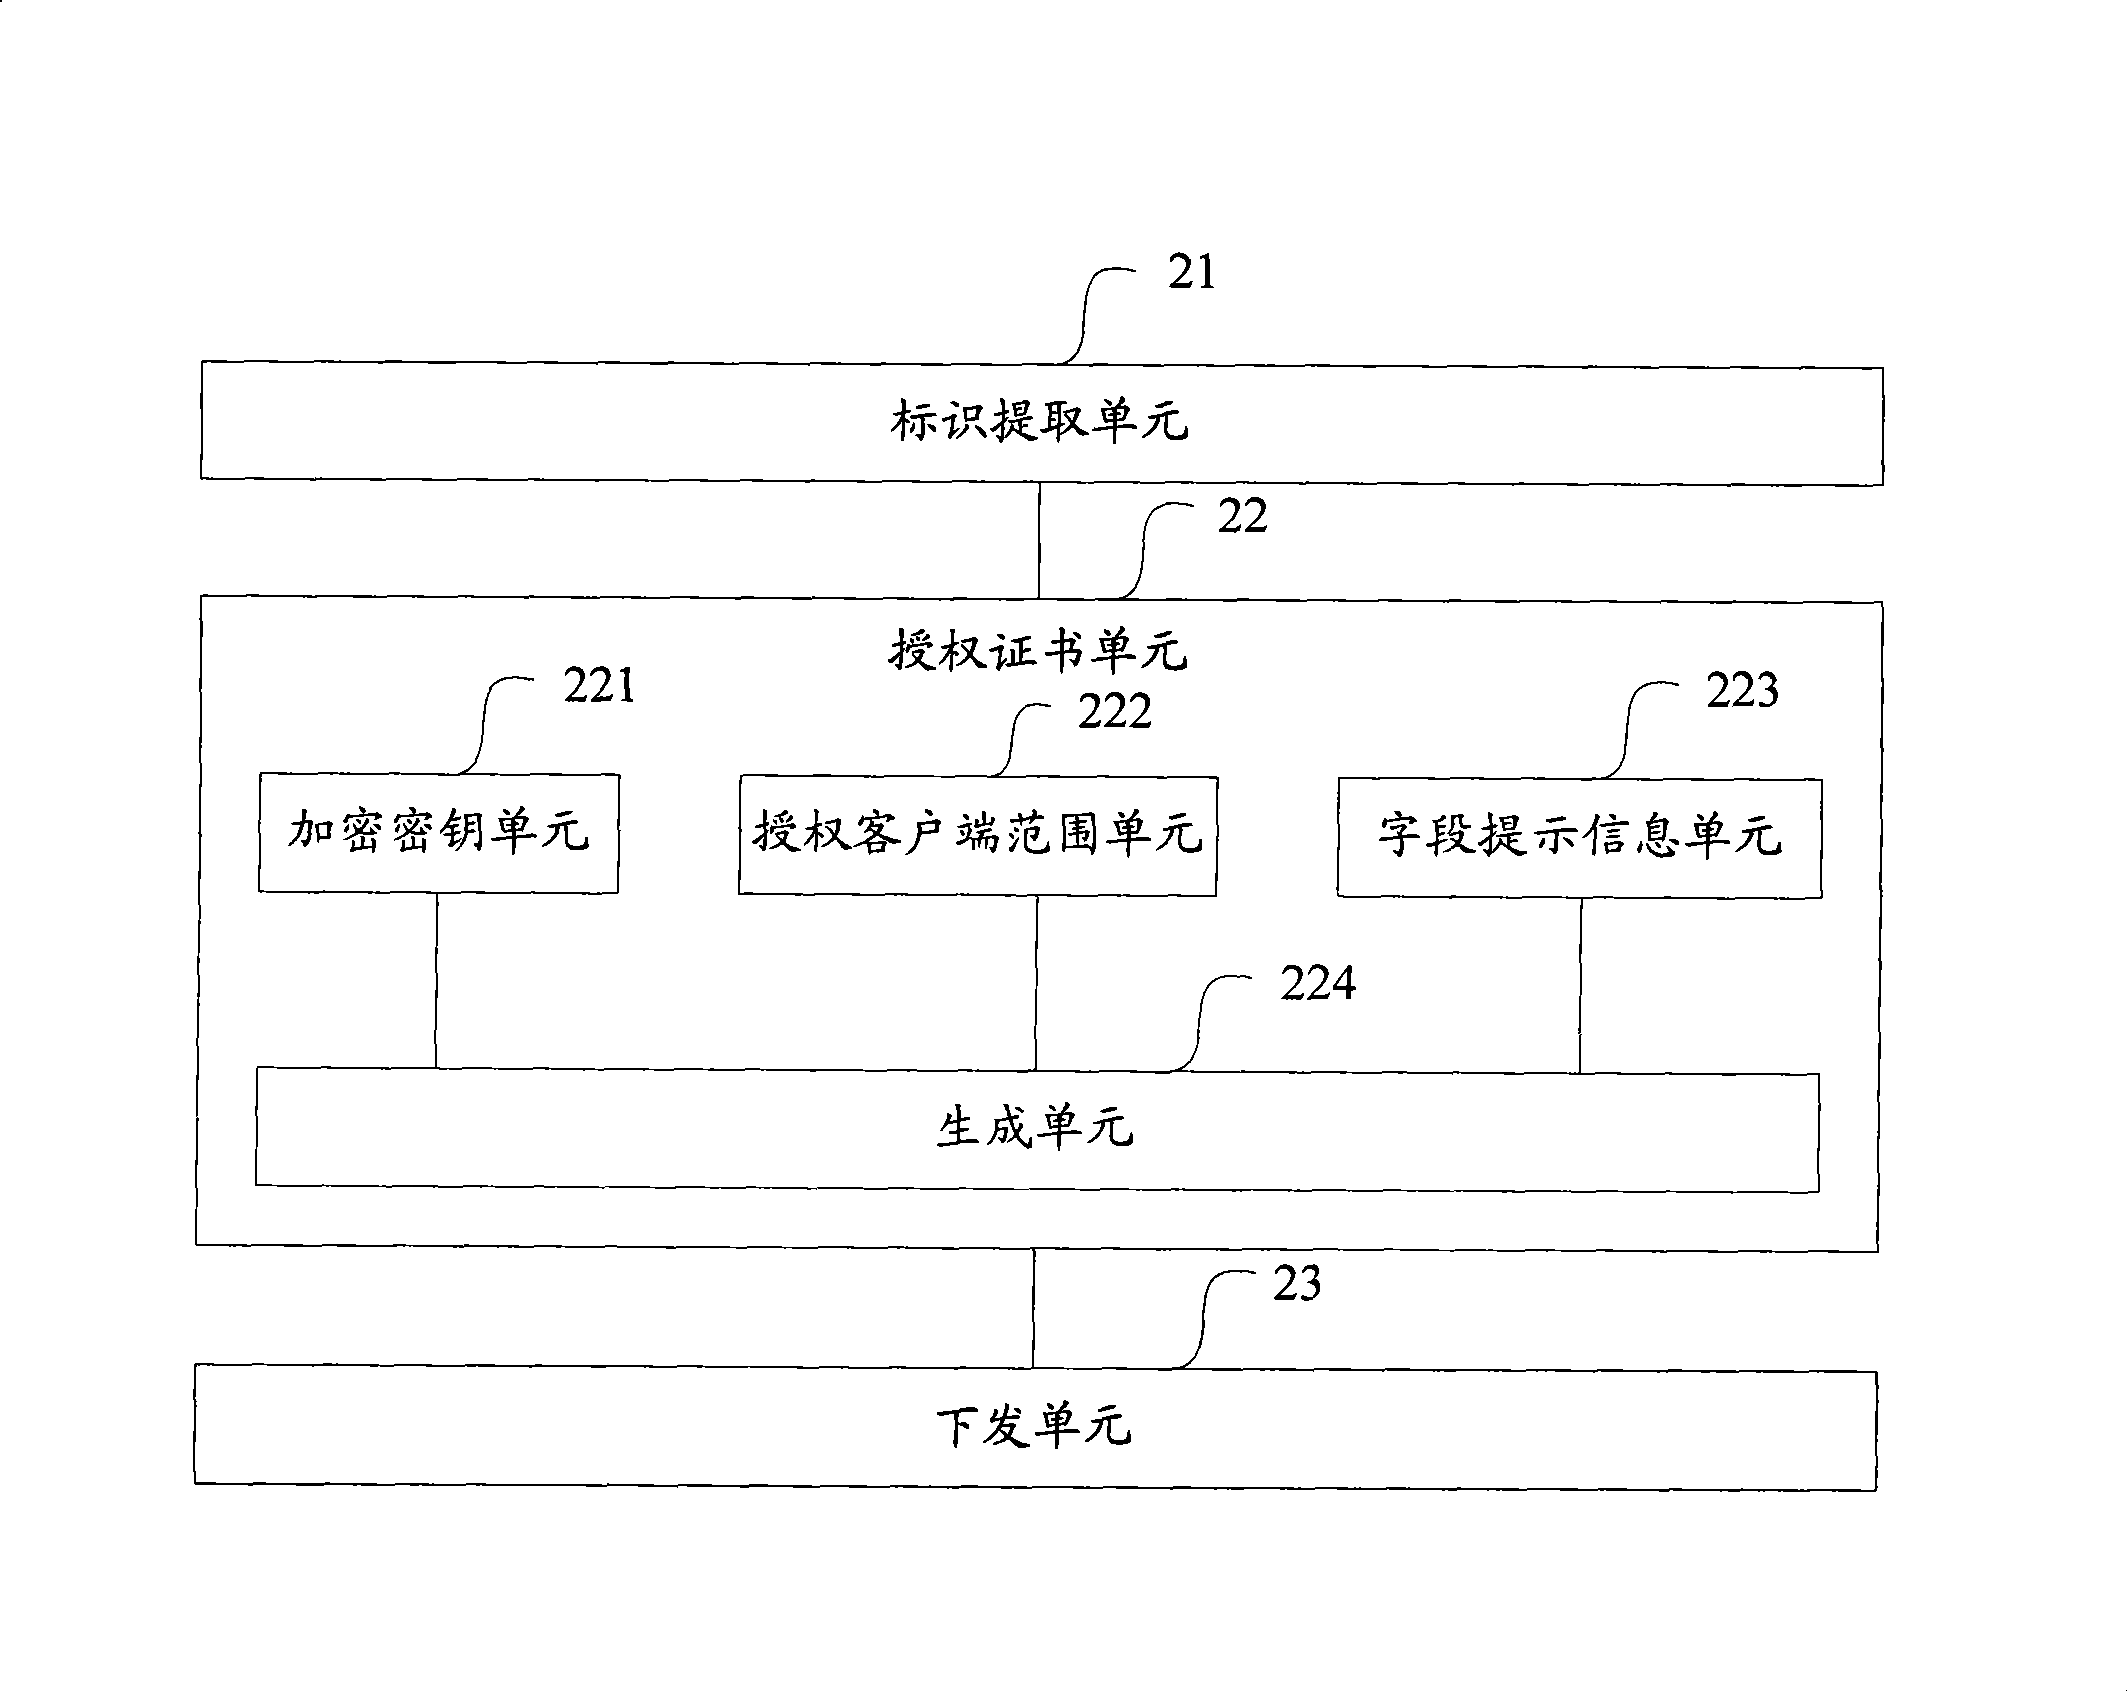 Method, system and device for digital content authentication